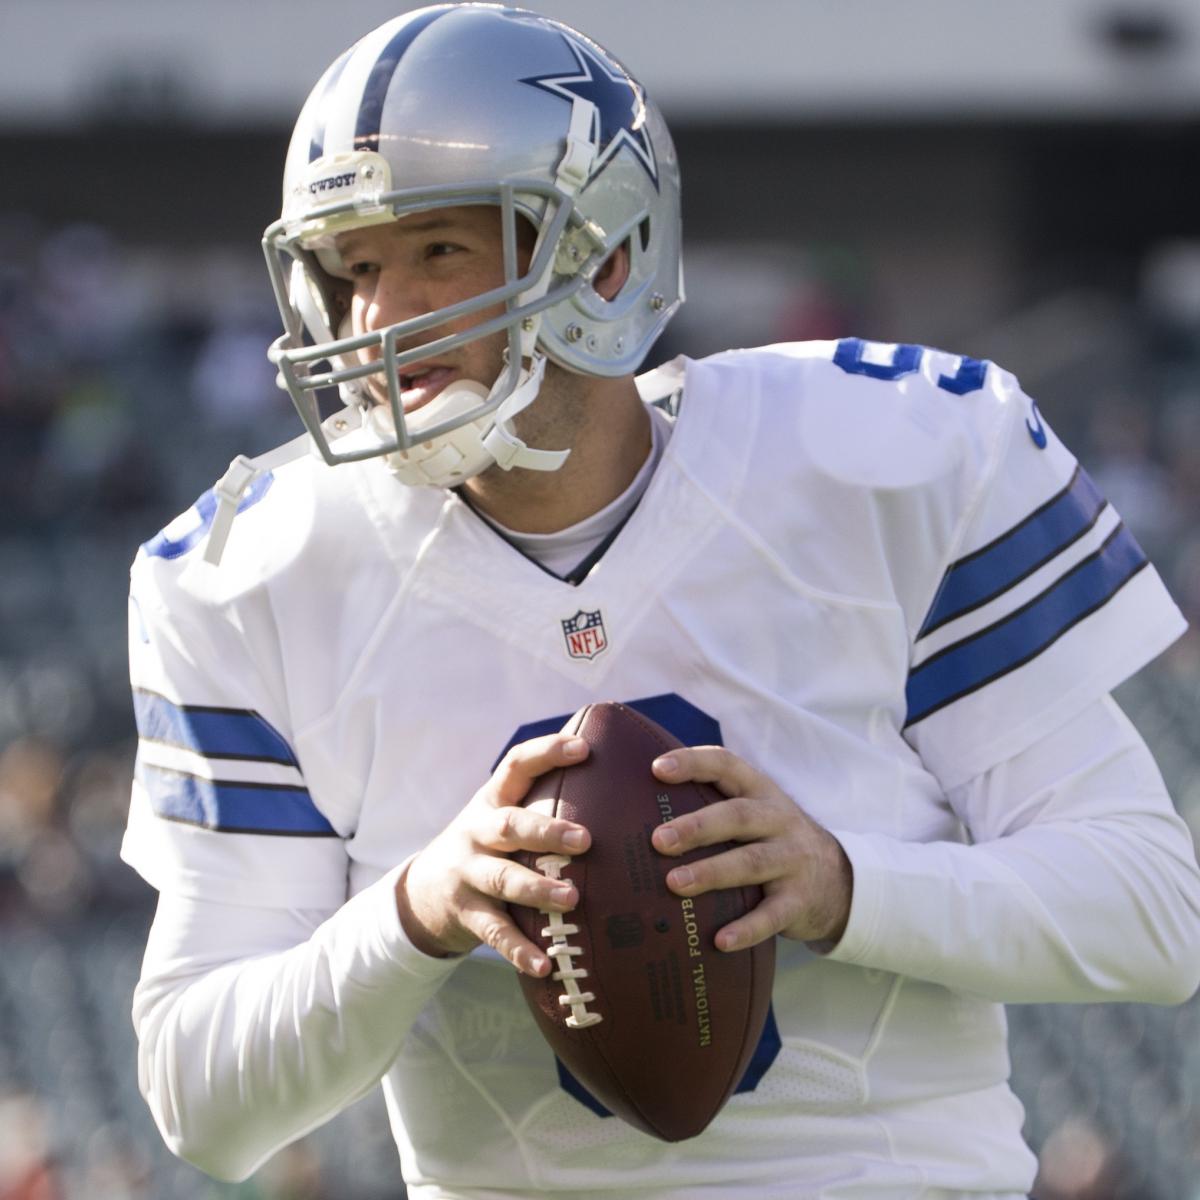 Tony Romo's 3 Kids: All About Hawkins, Rivers and Jones